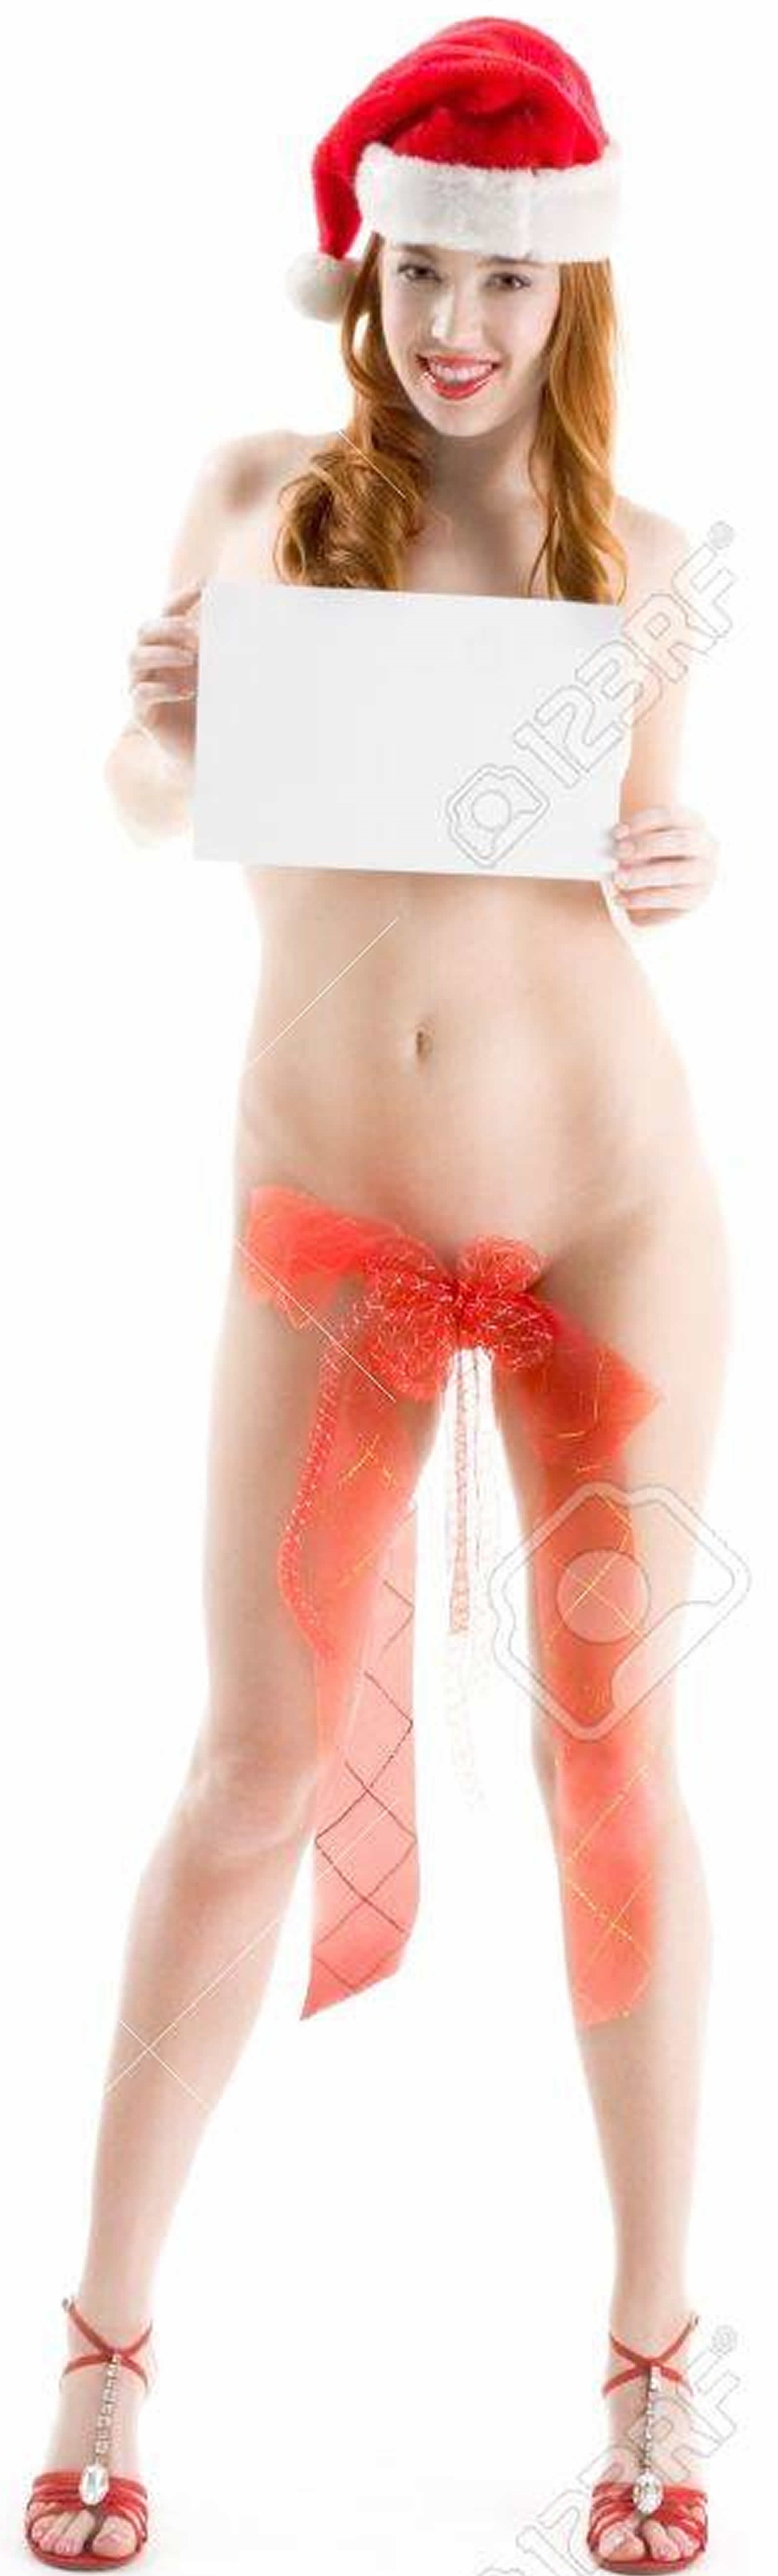 a woman's body with a red bow